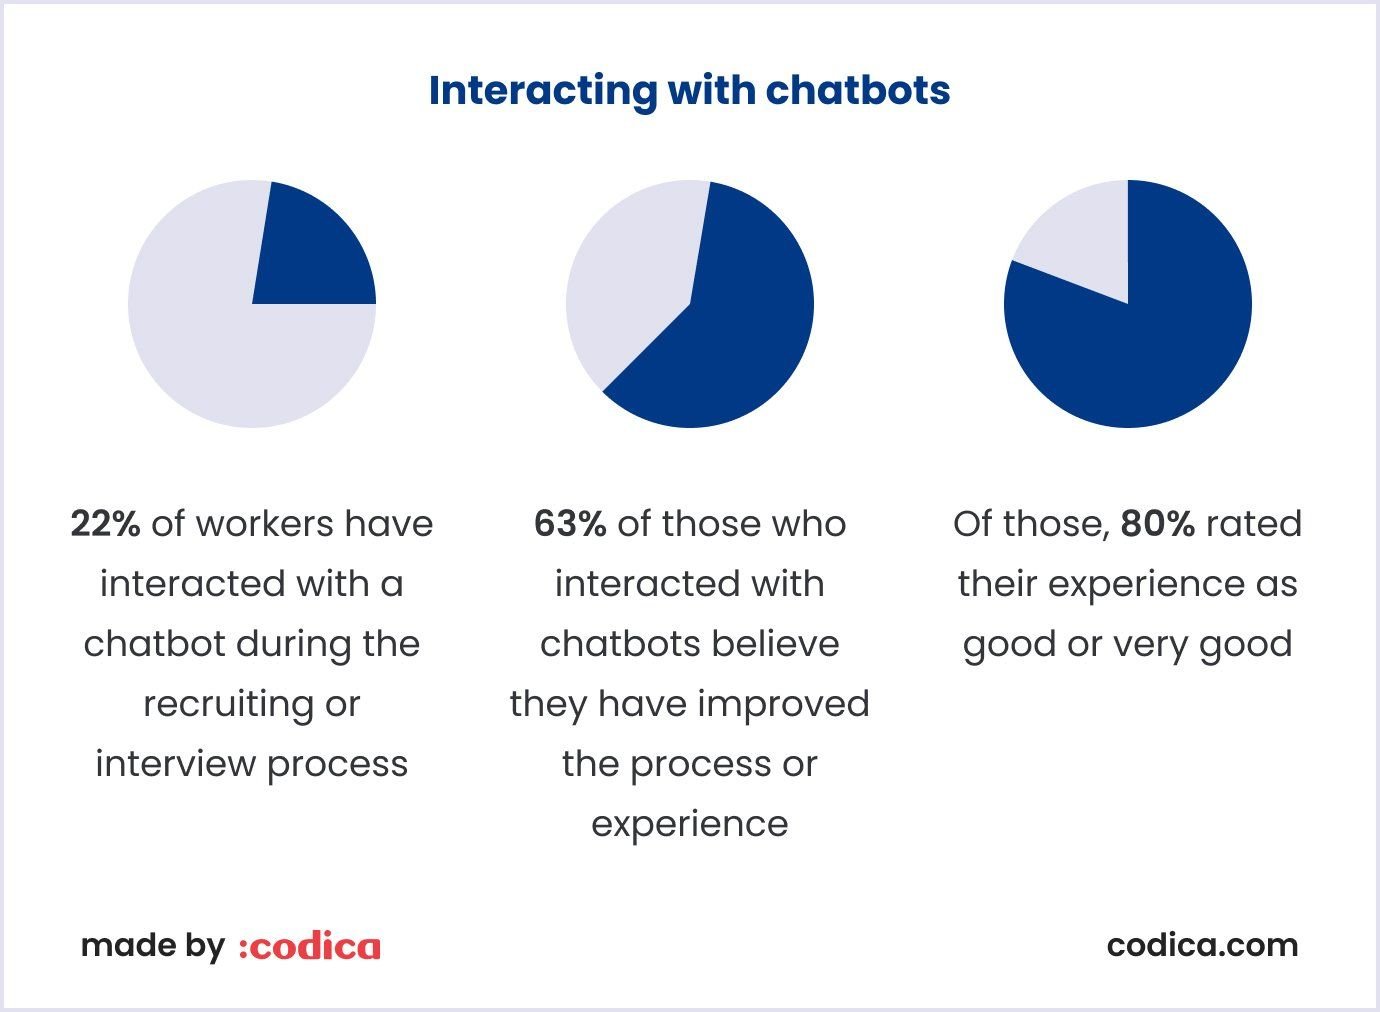 Chatbots in the recruitment process